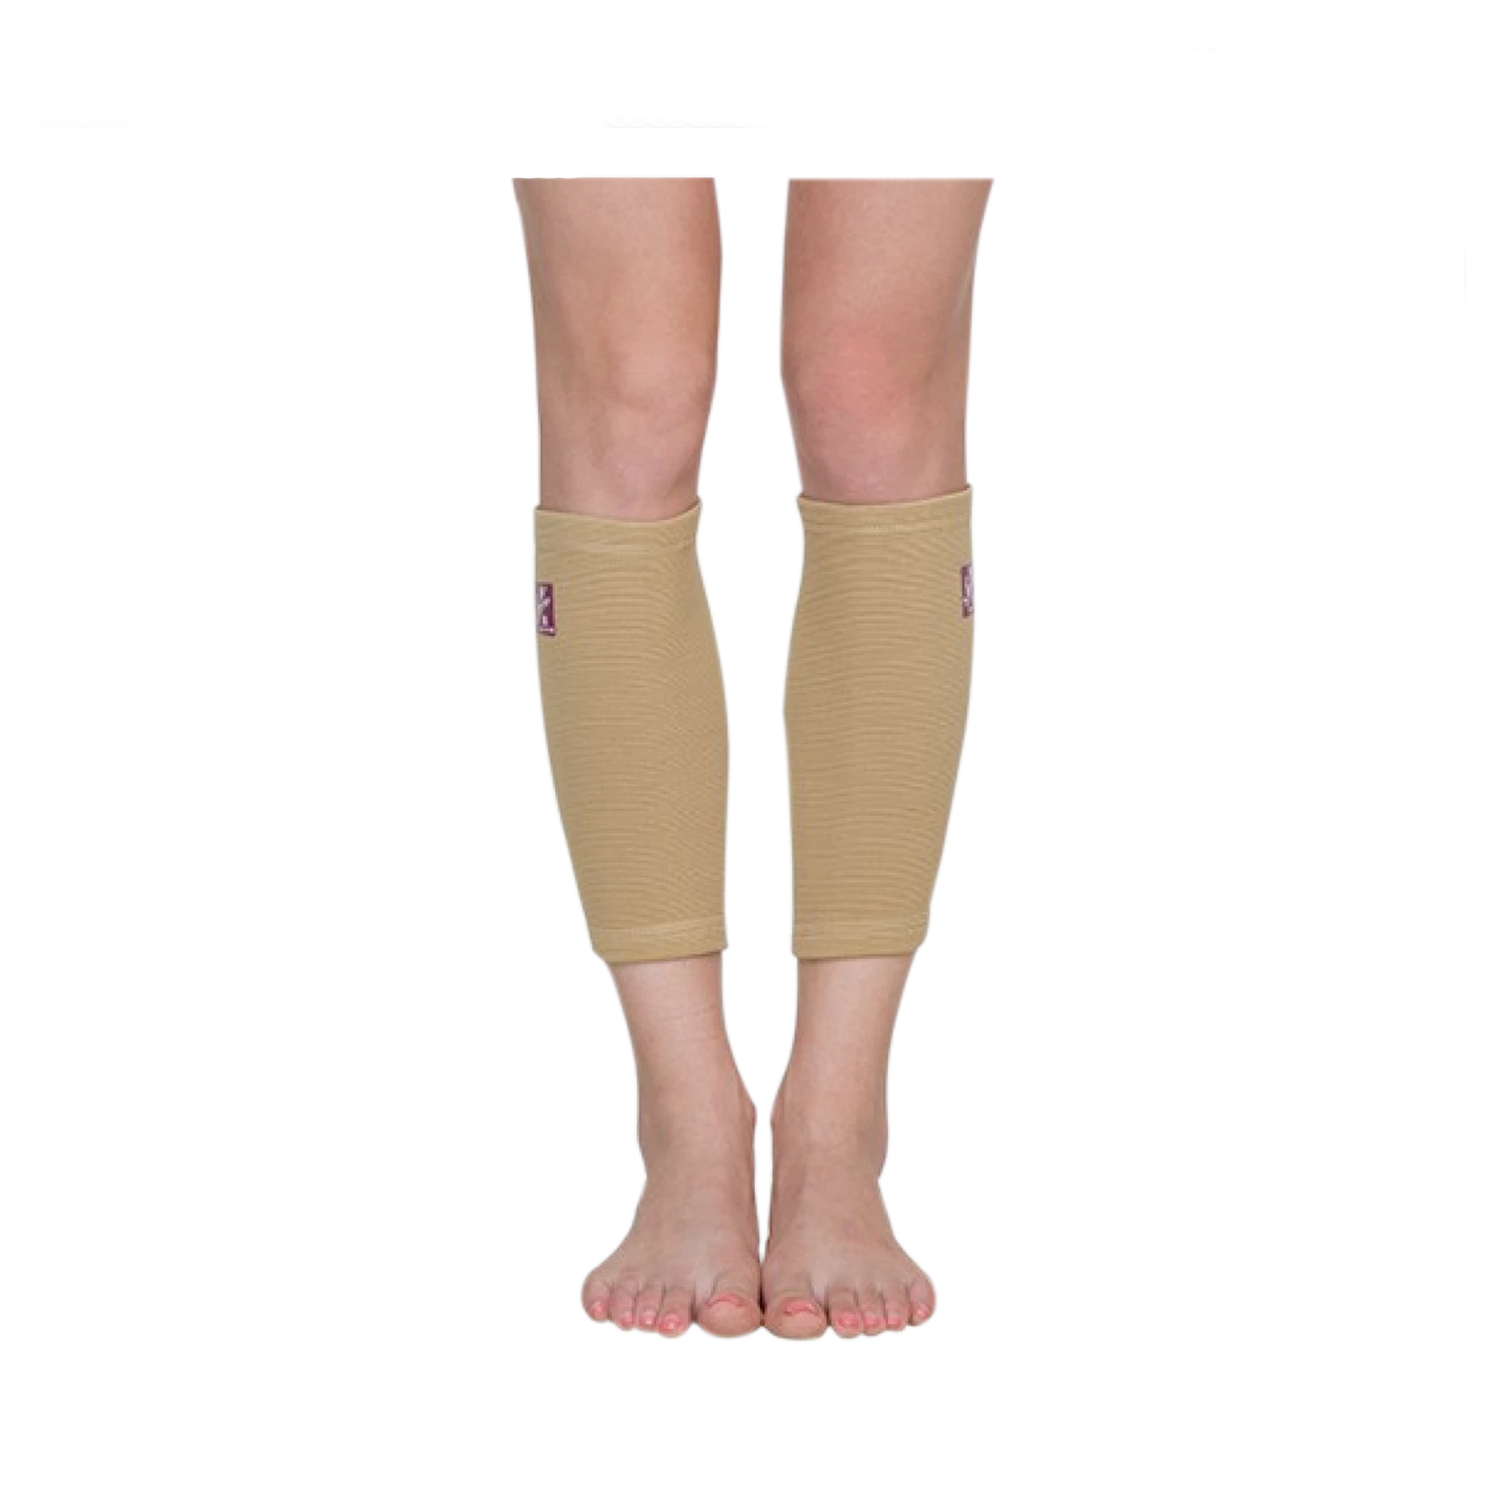 Flamingo calf support bandage large  Ortho Doctors Approved calf  compression sleeve